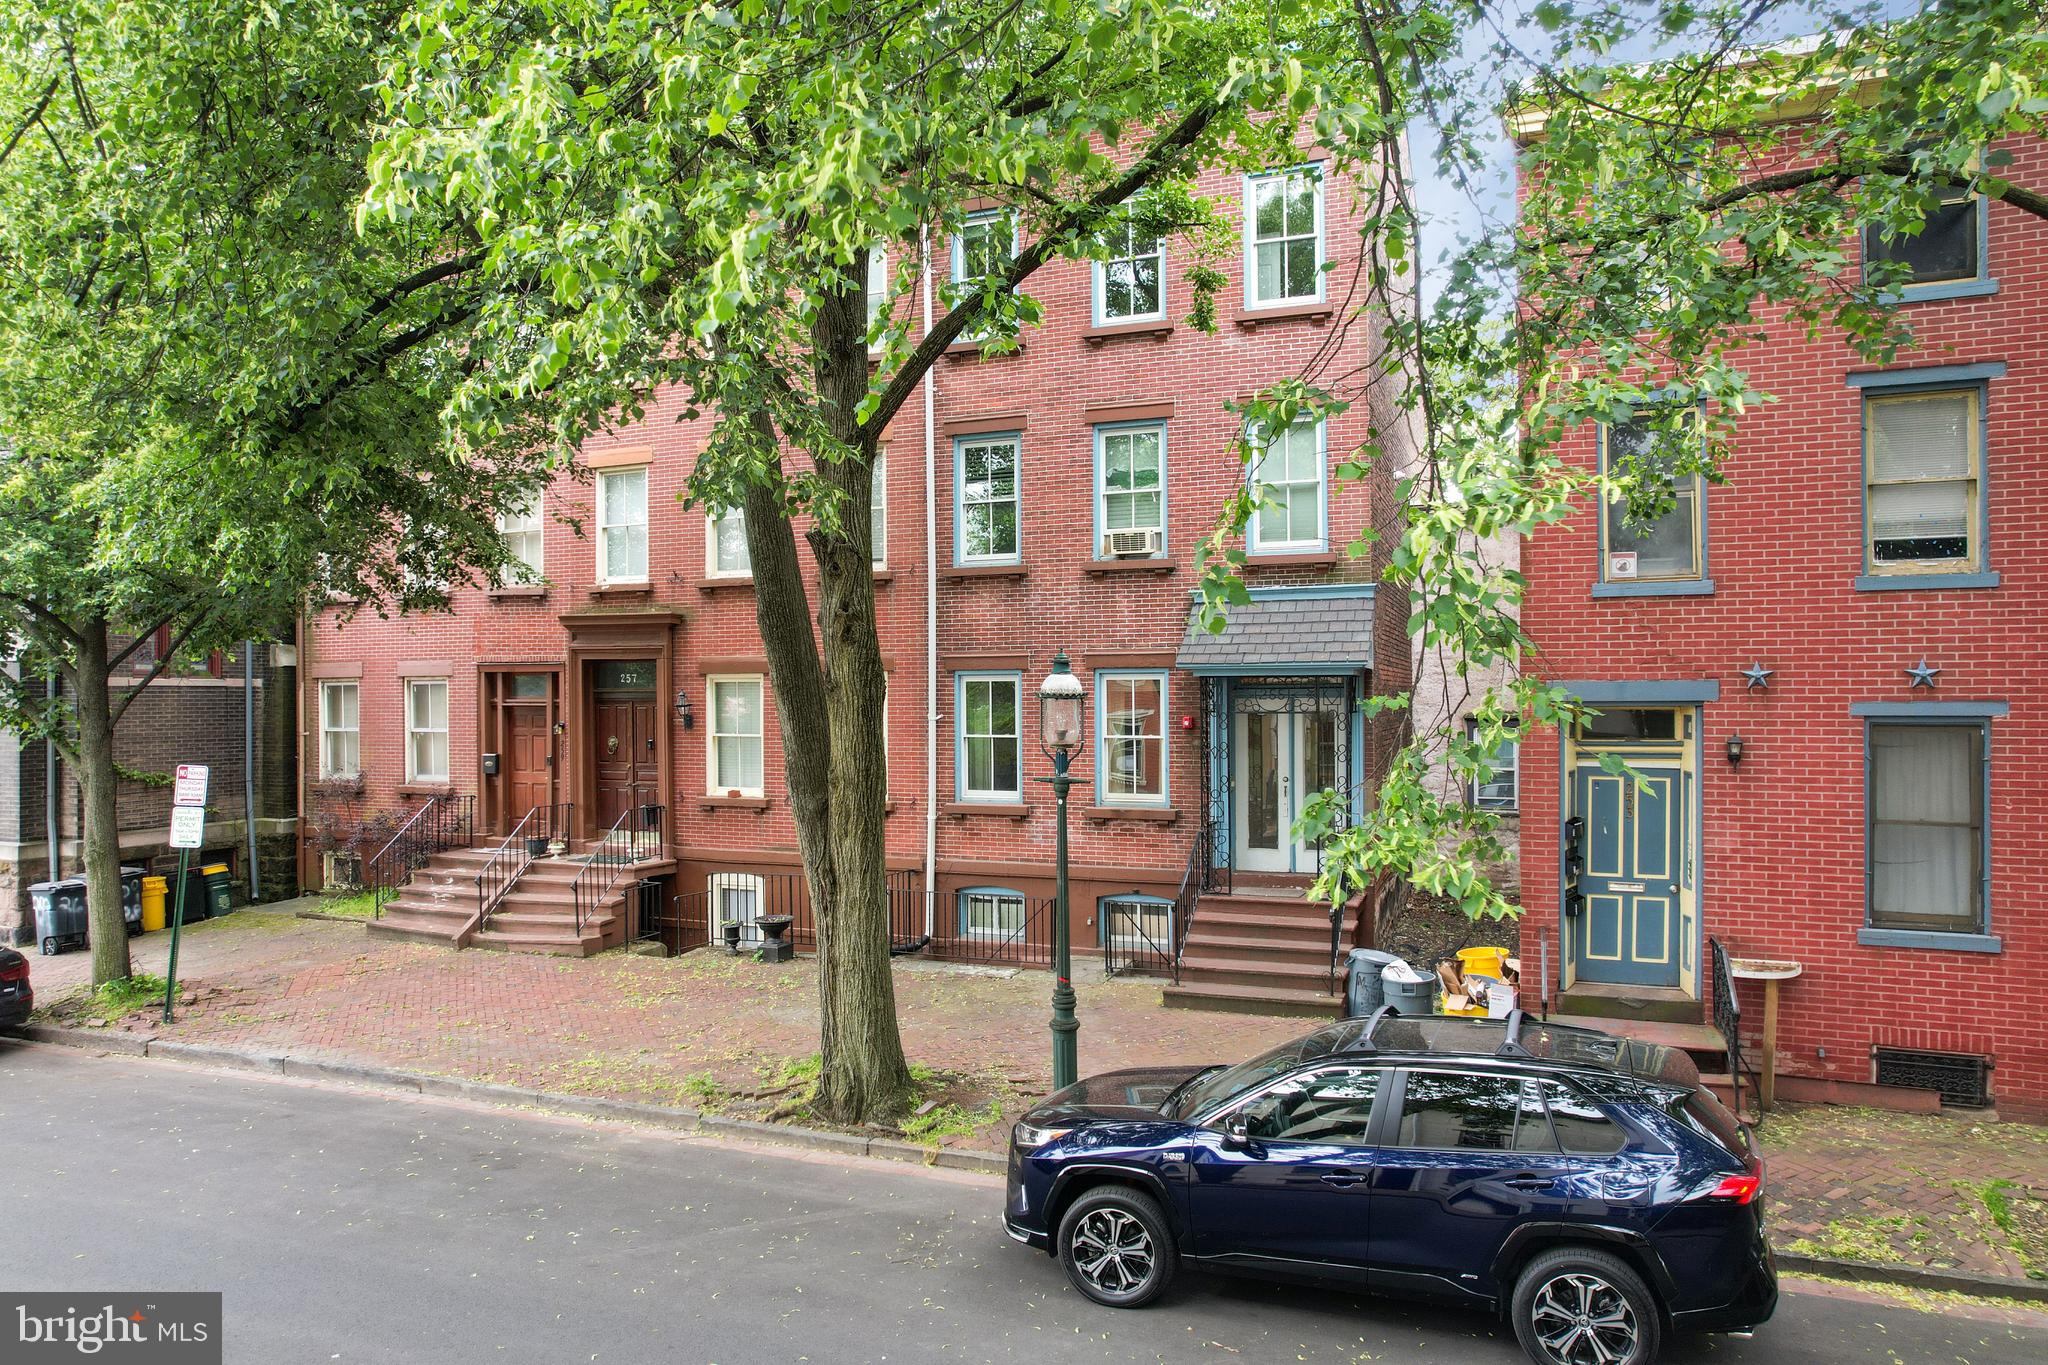 a car parked in front of a brick house